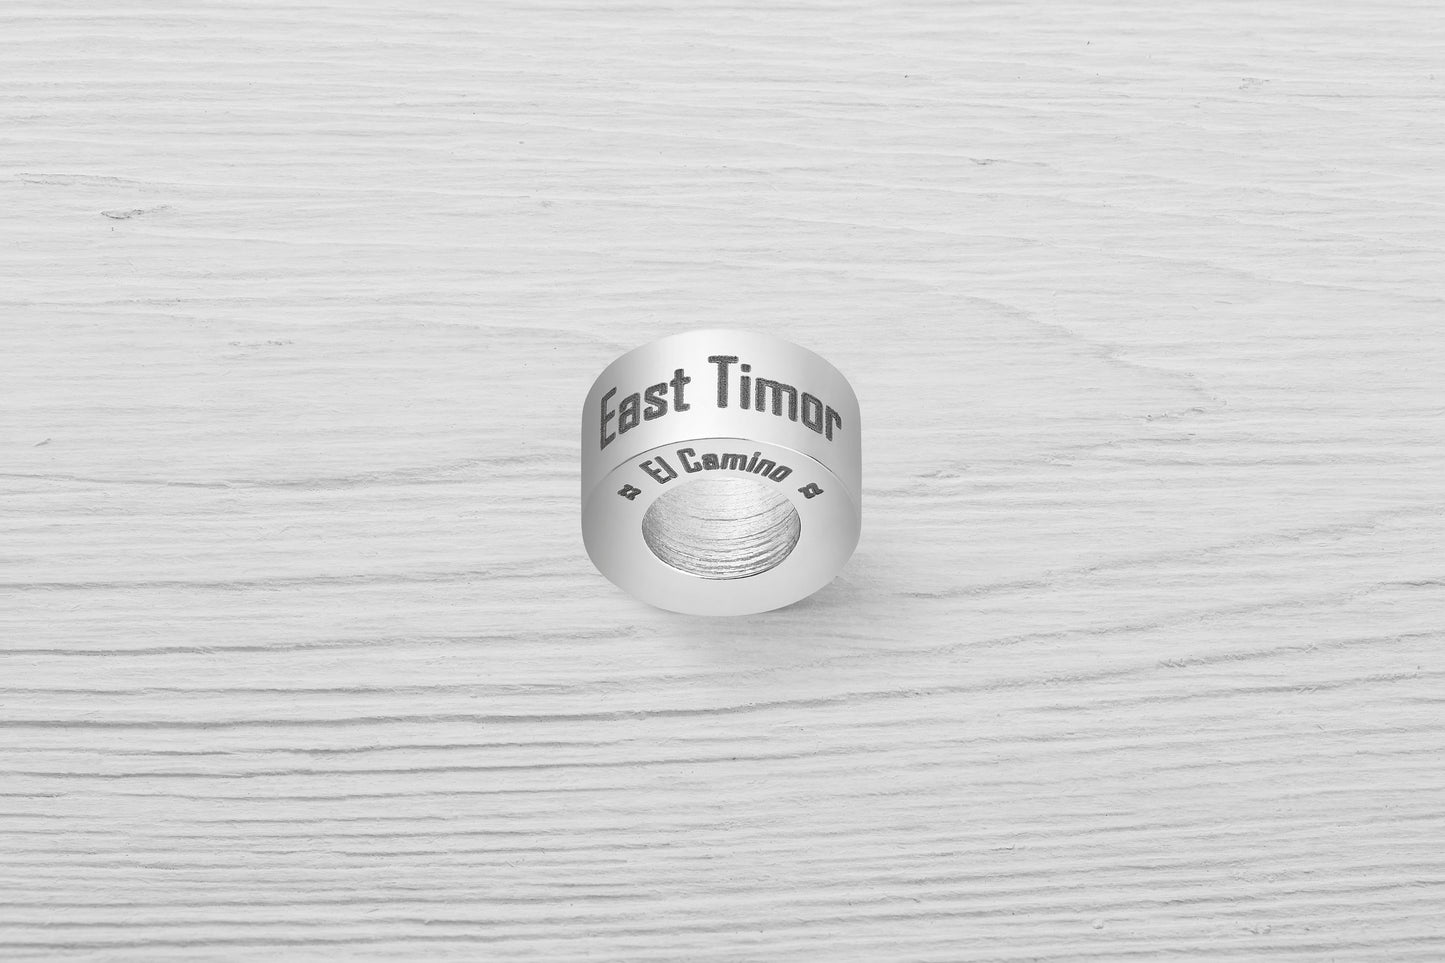 El Camino East Timor Country Step Travel Charm Bead